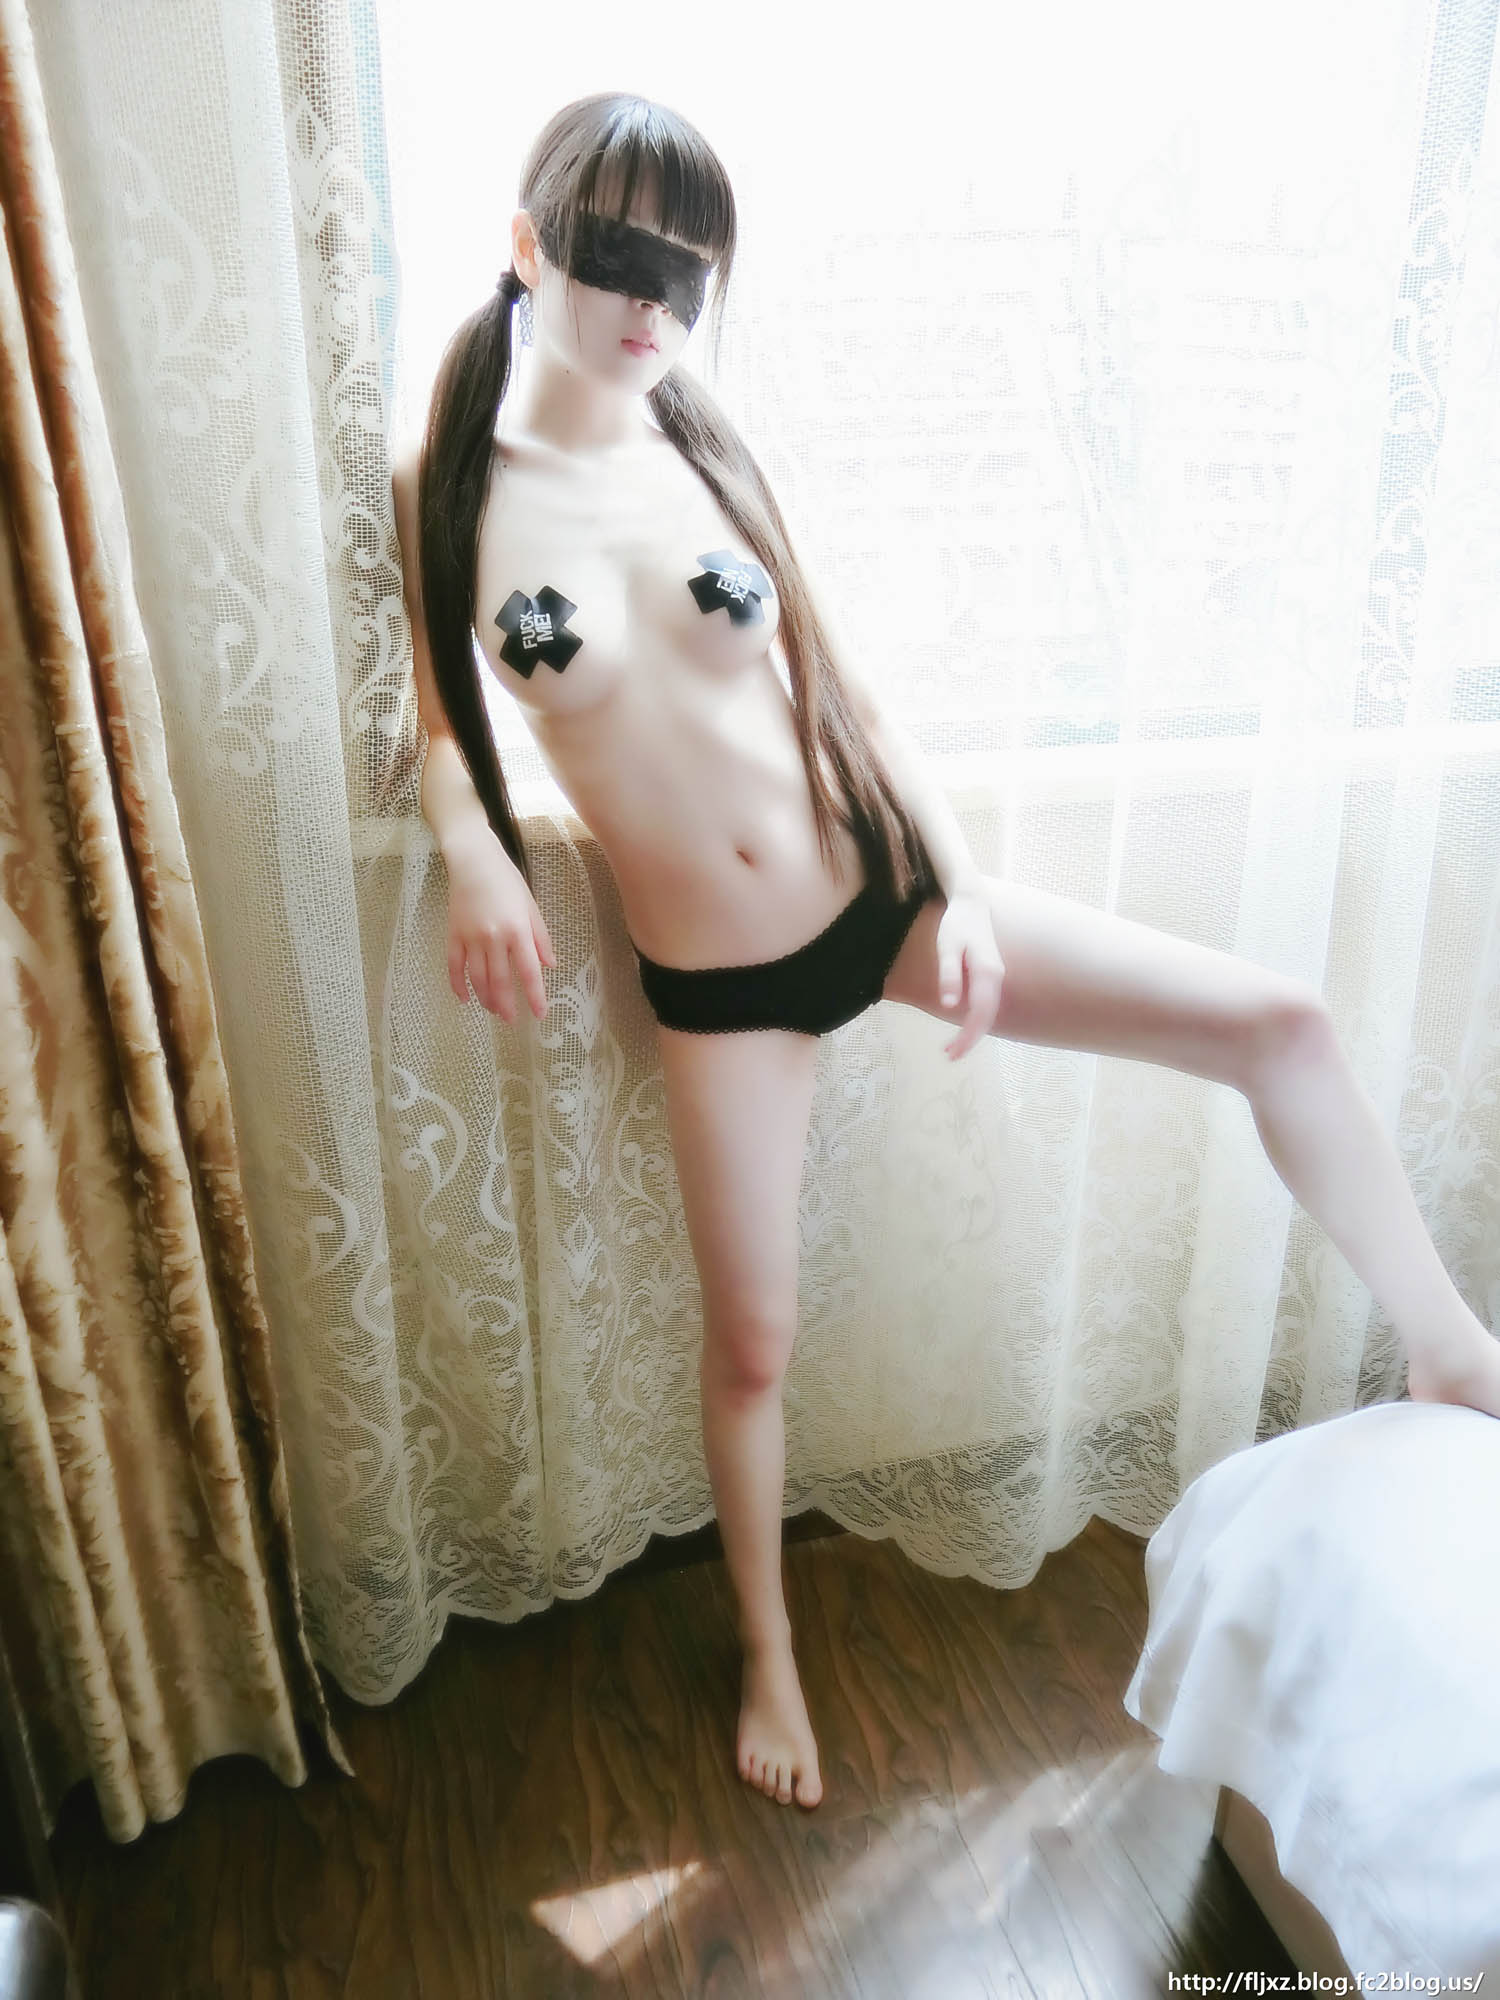 Hot Chinese Blindfolded Girl Nude Photoshoot Petite Breasts Tits Ass Legs